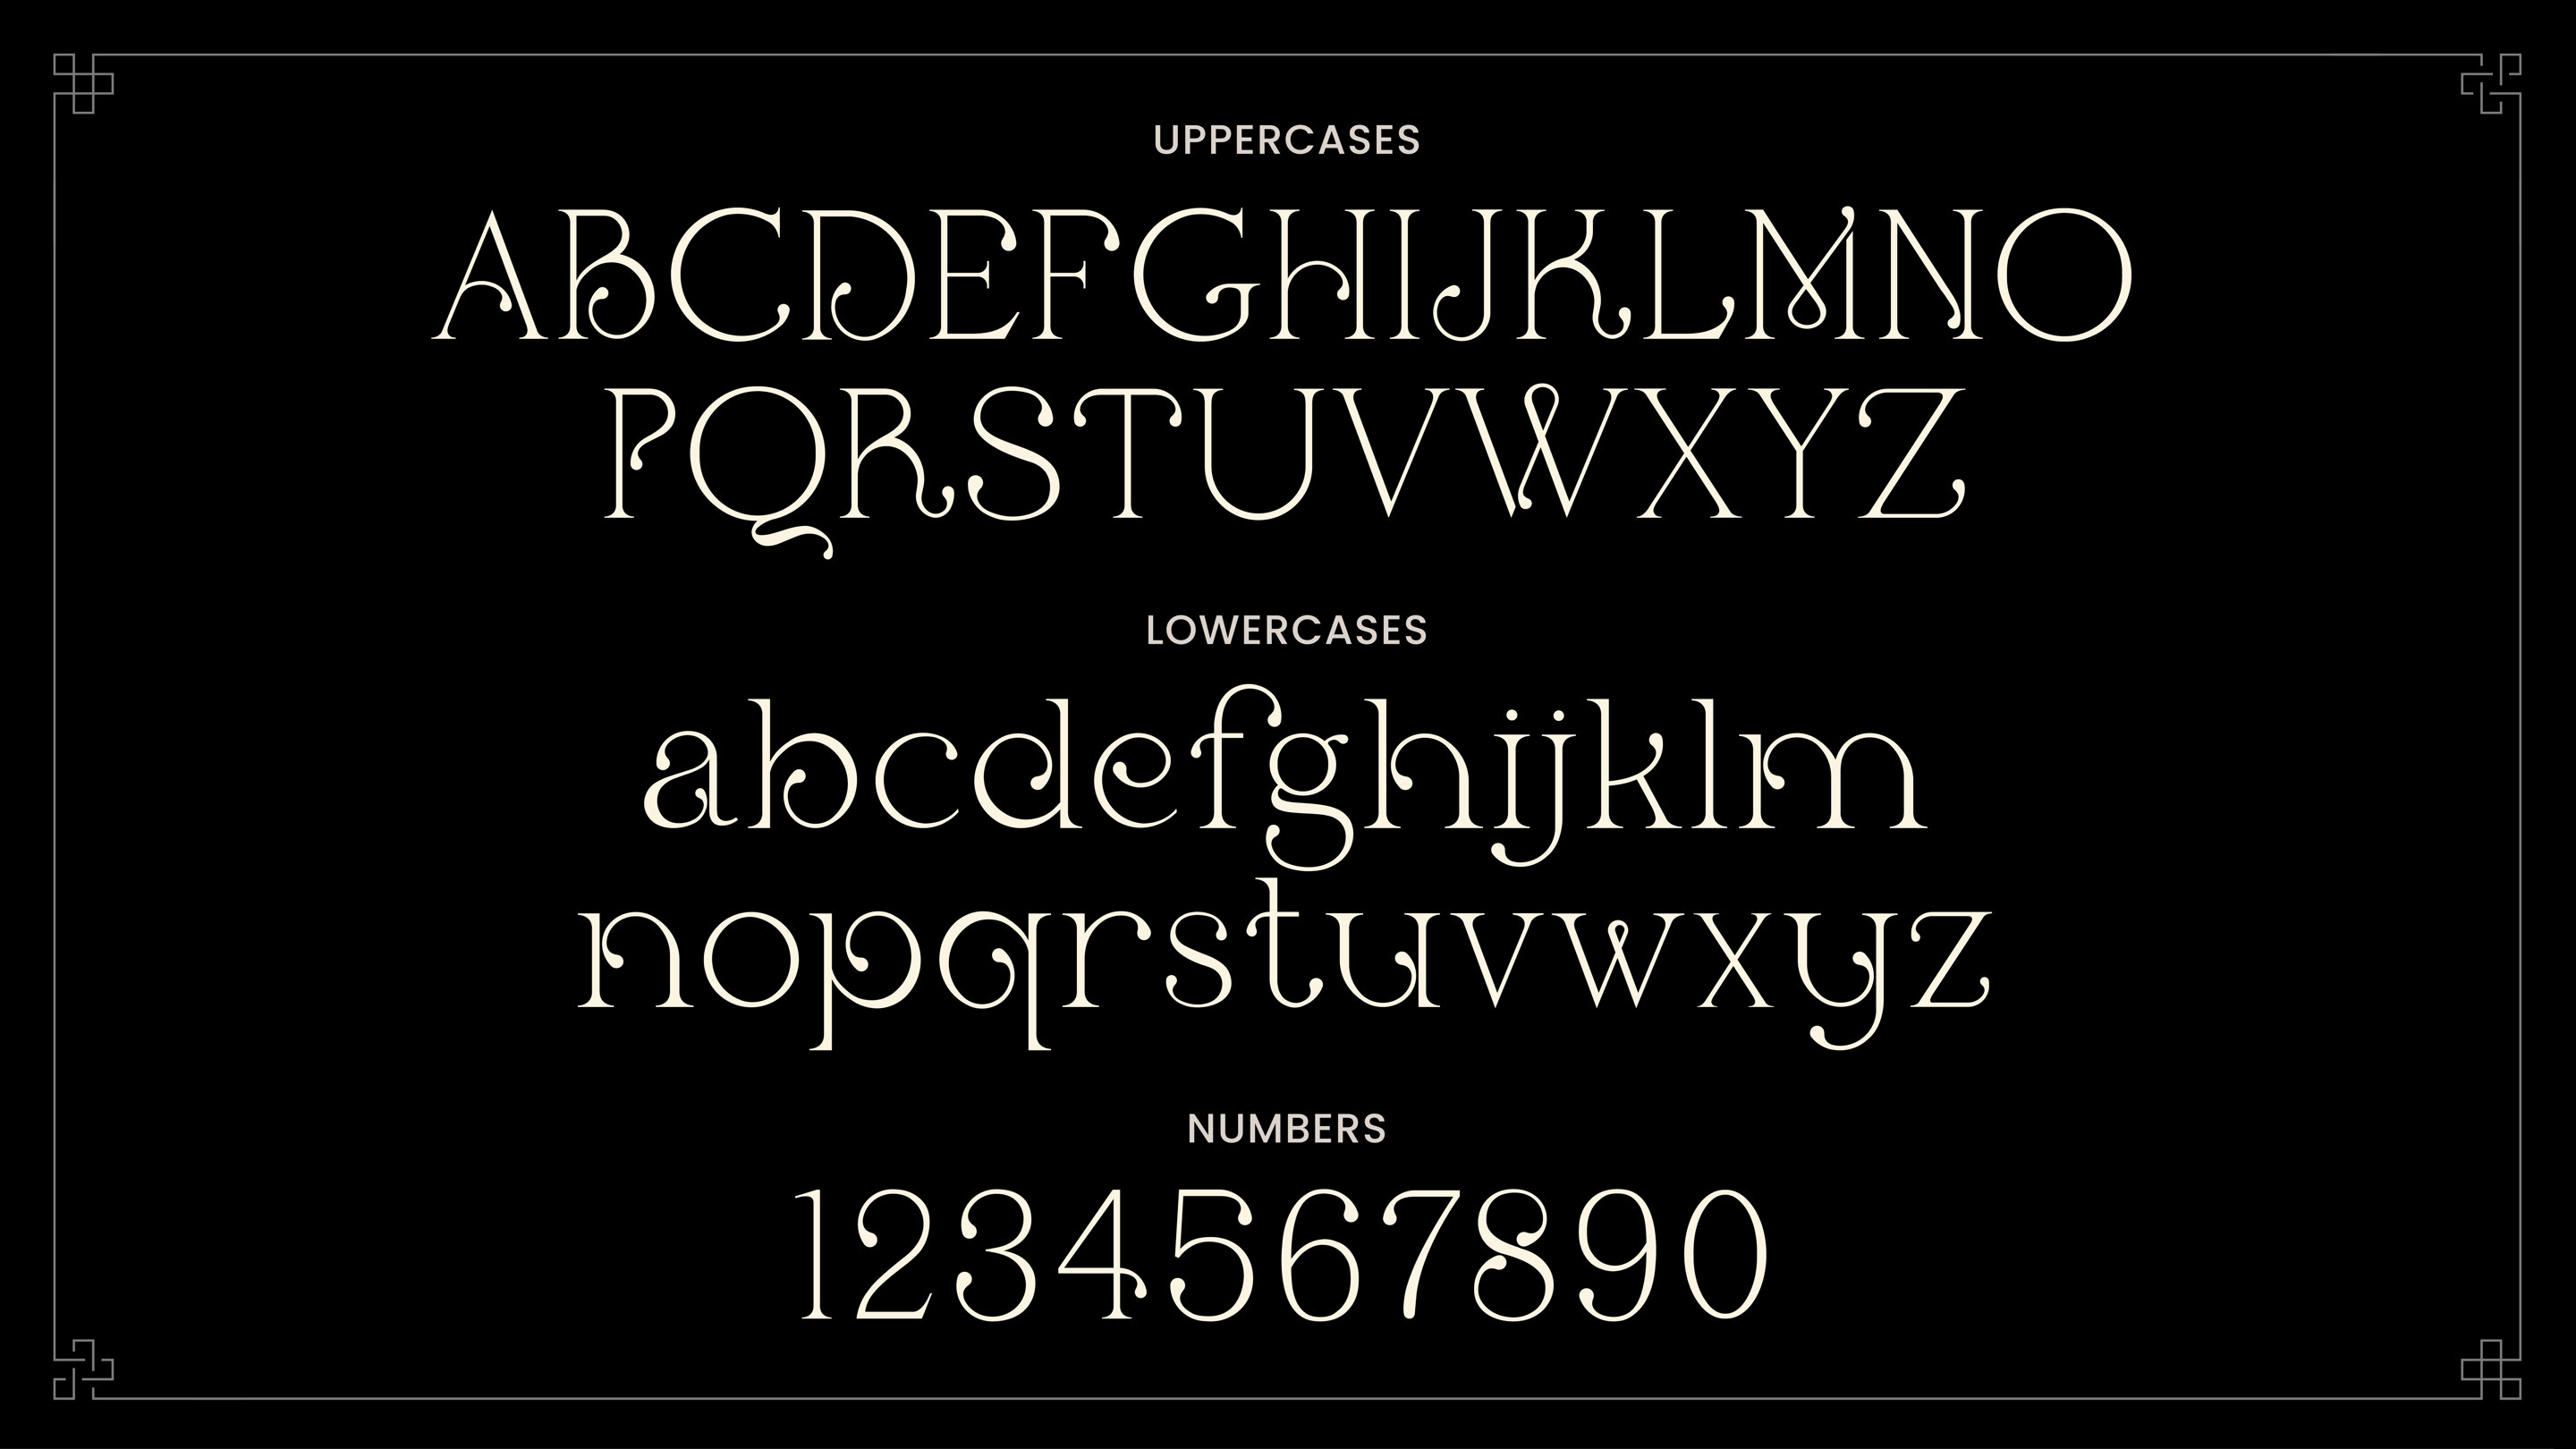 Madame_Bovary_Typeface_2